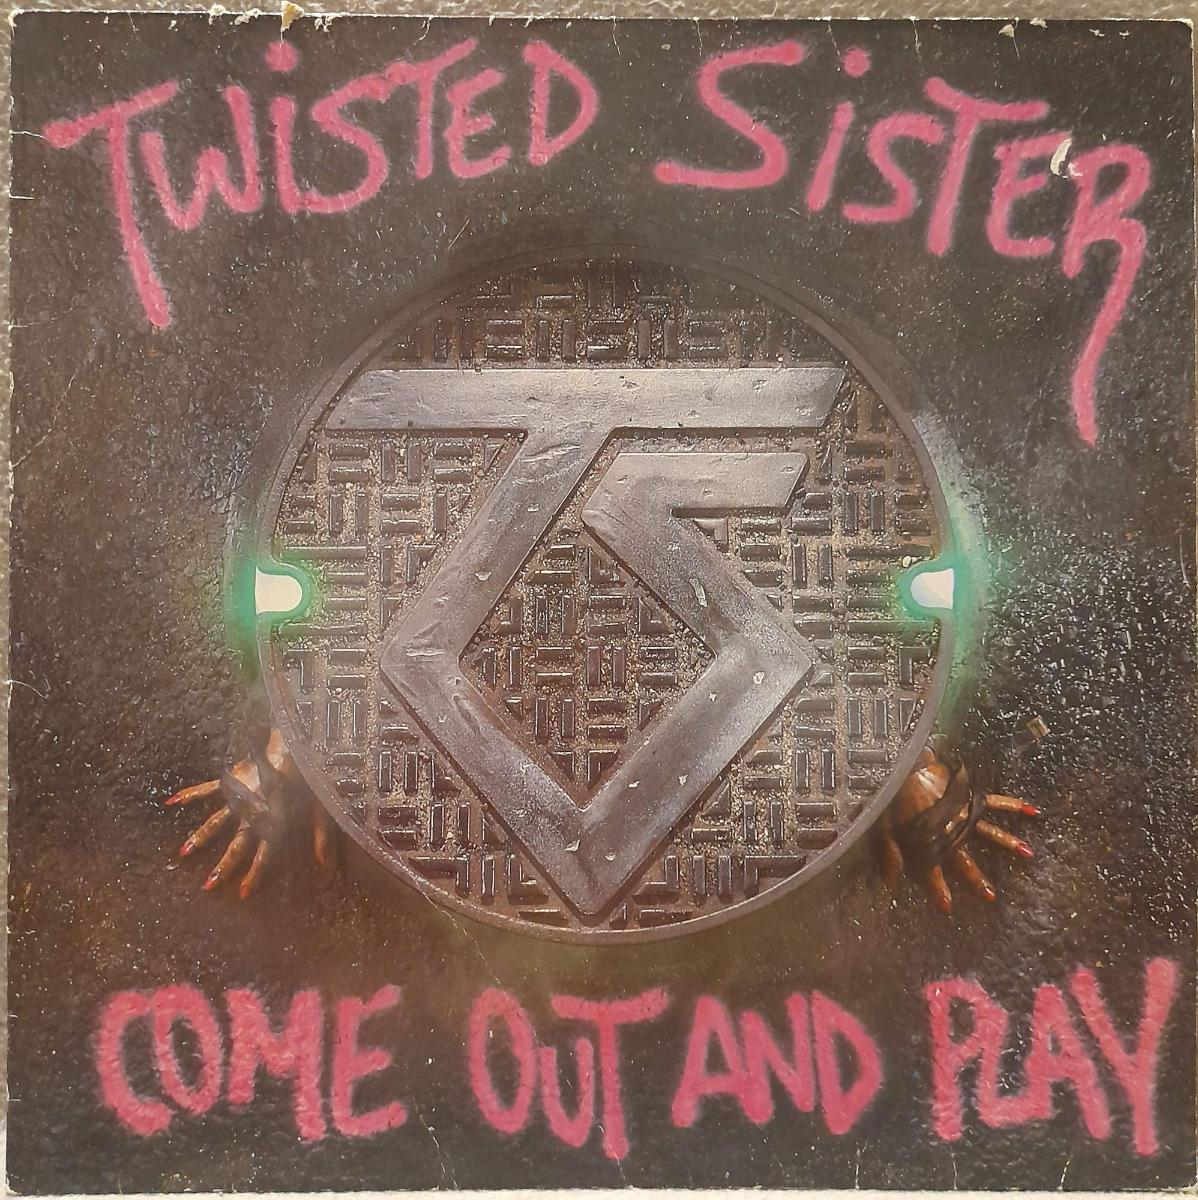 LP Twisted Sister - Come Out And Play, 1985 | Aukro